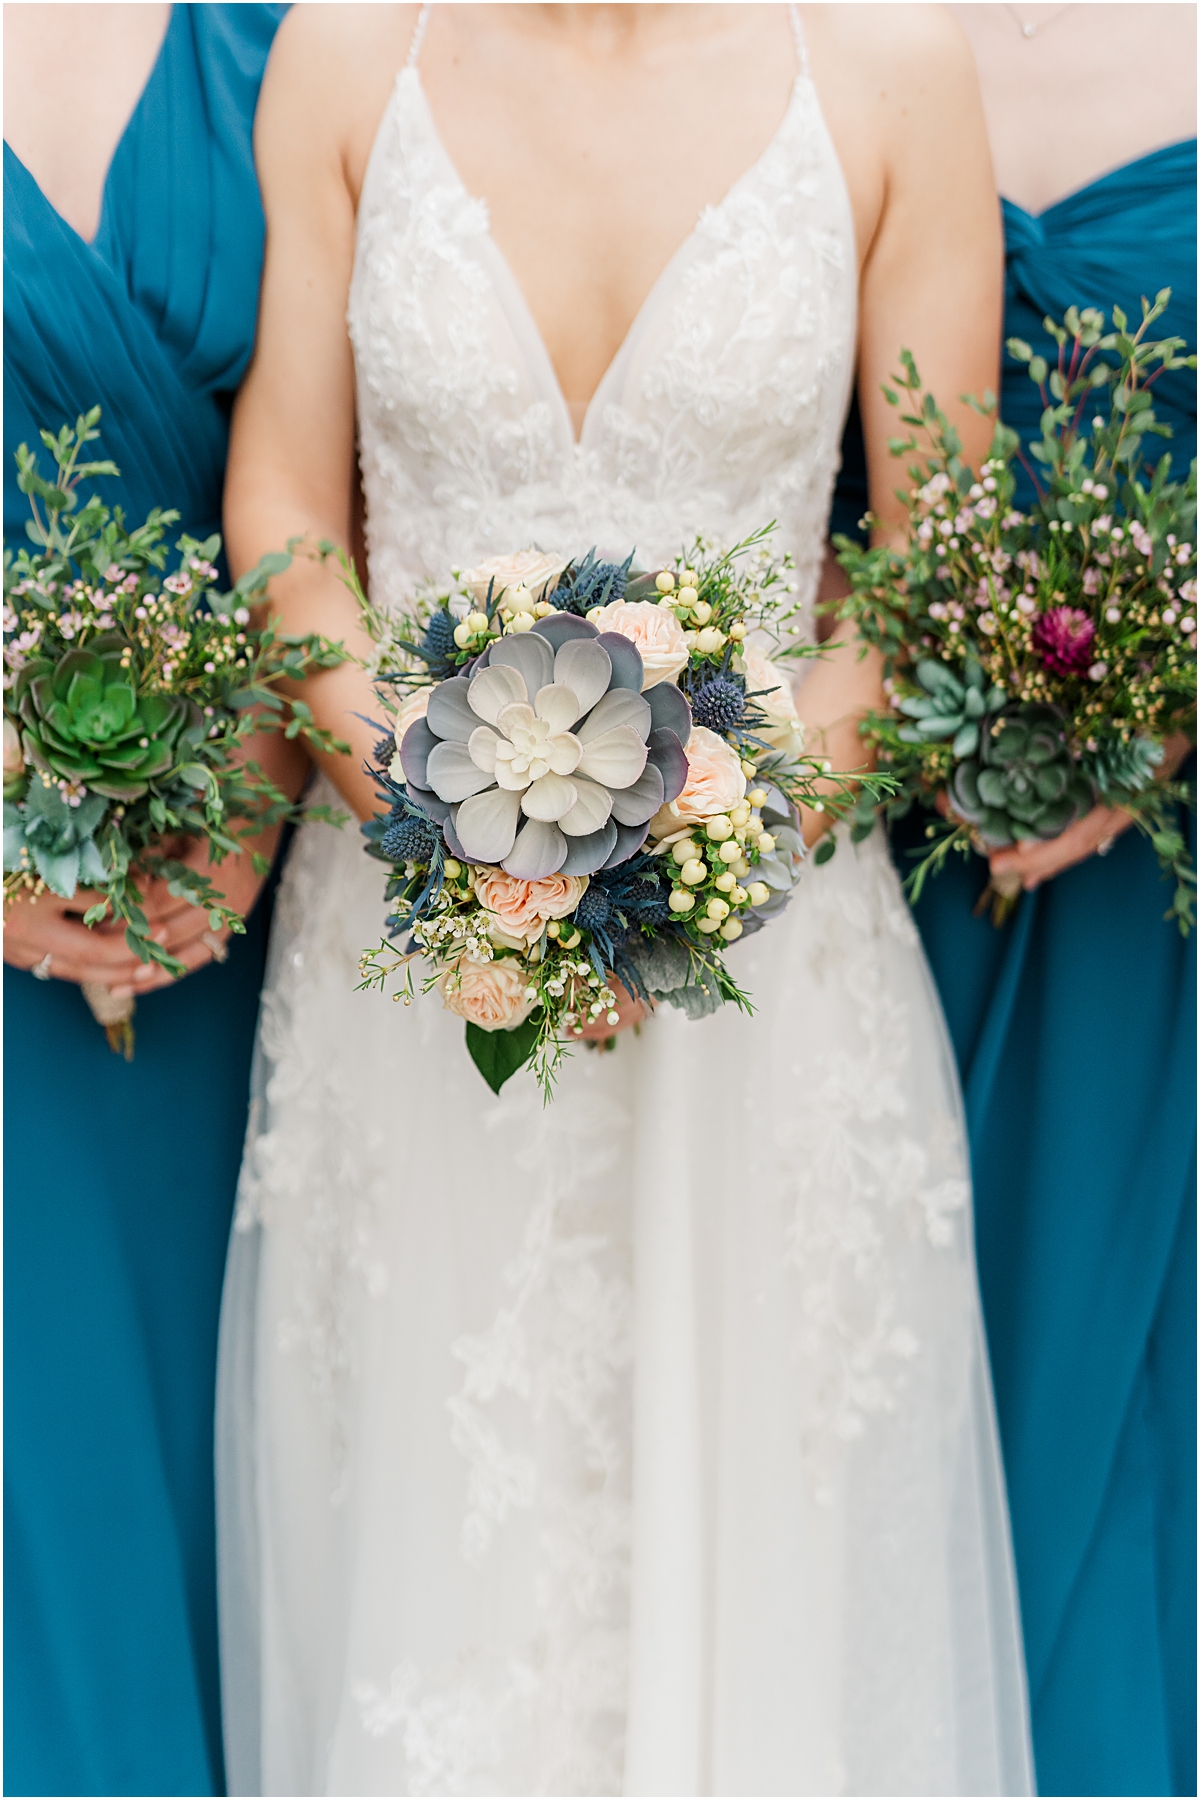 Bridesmaids and Brides bouquet taken by a wedding photographer